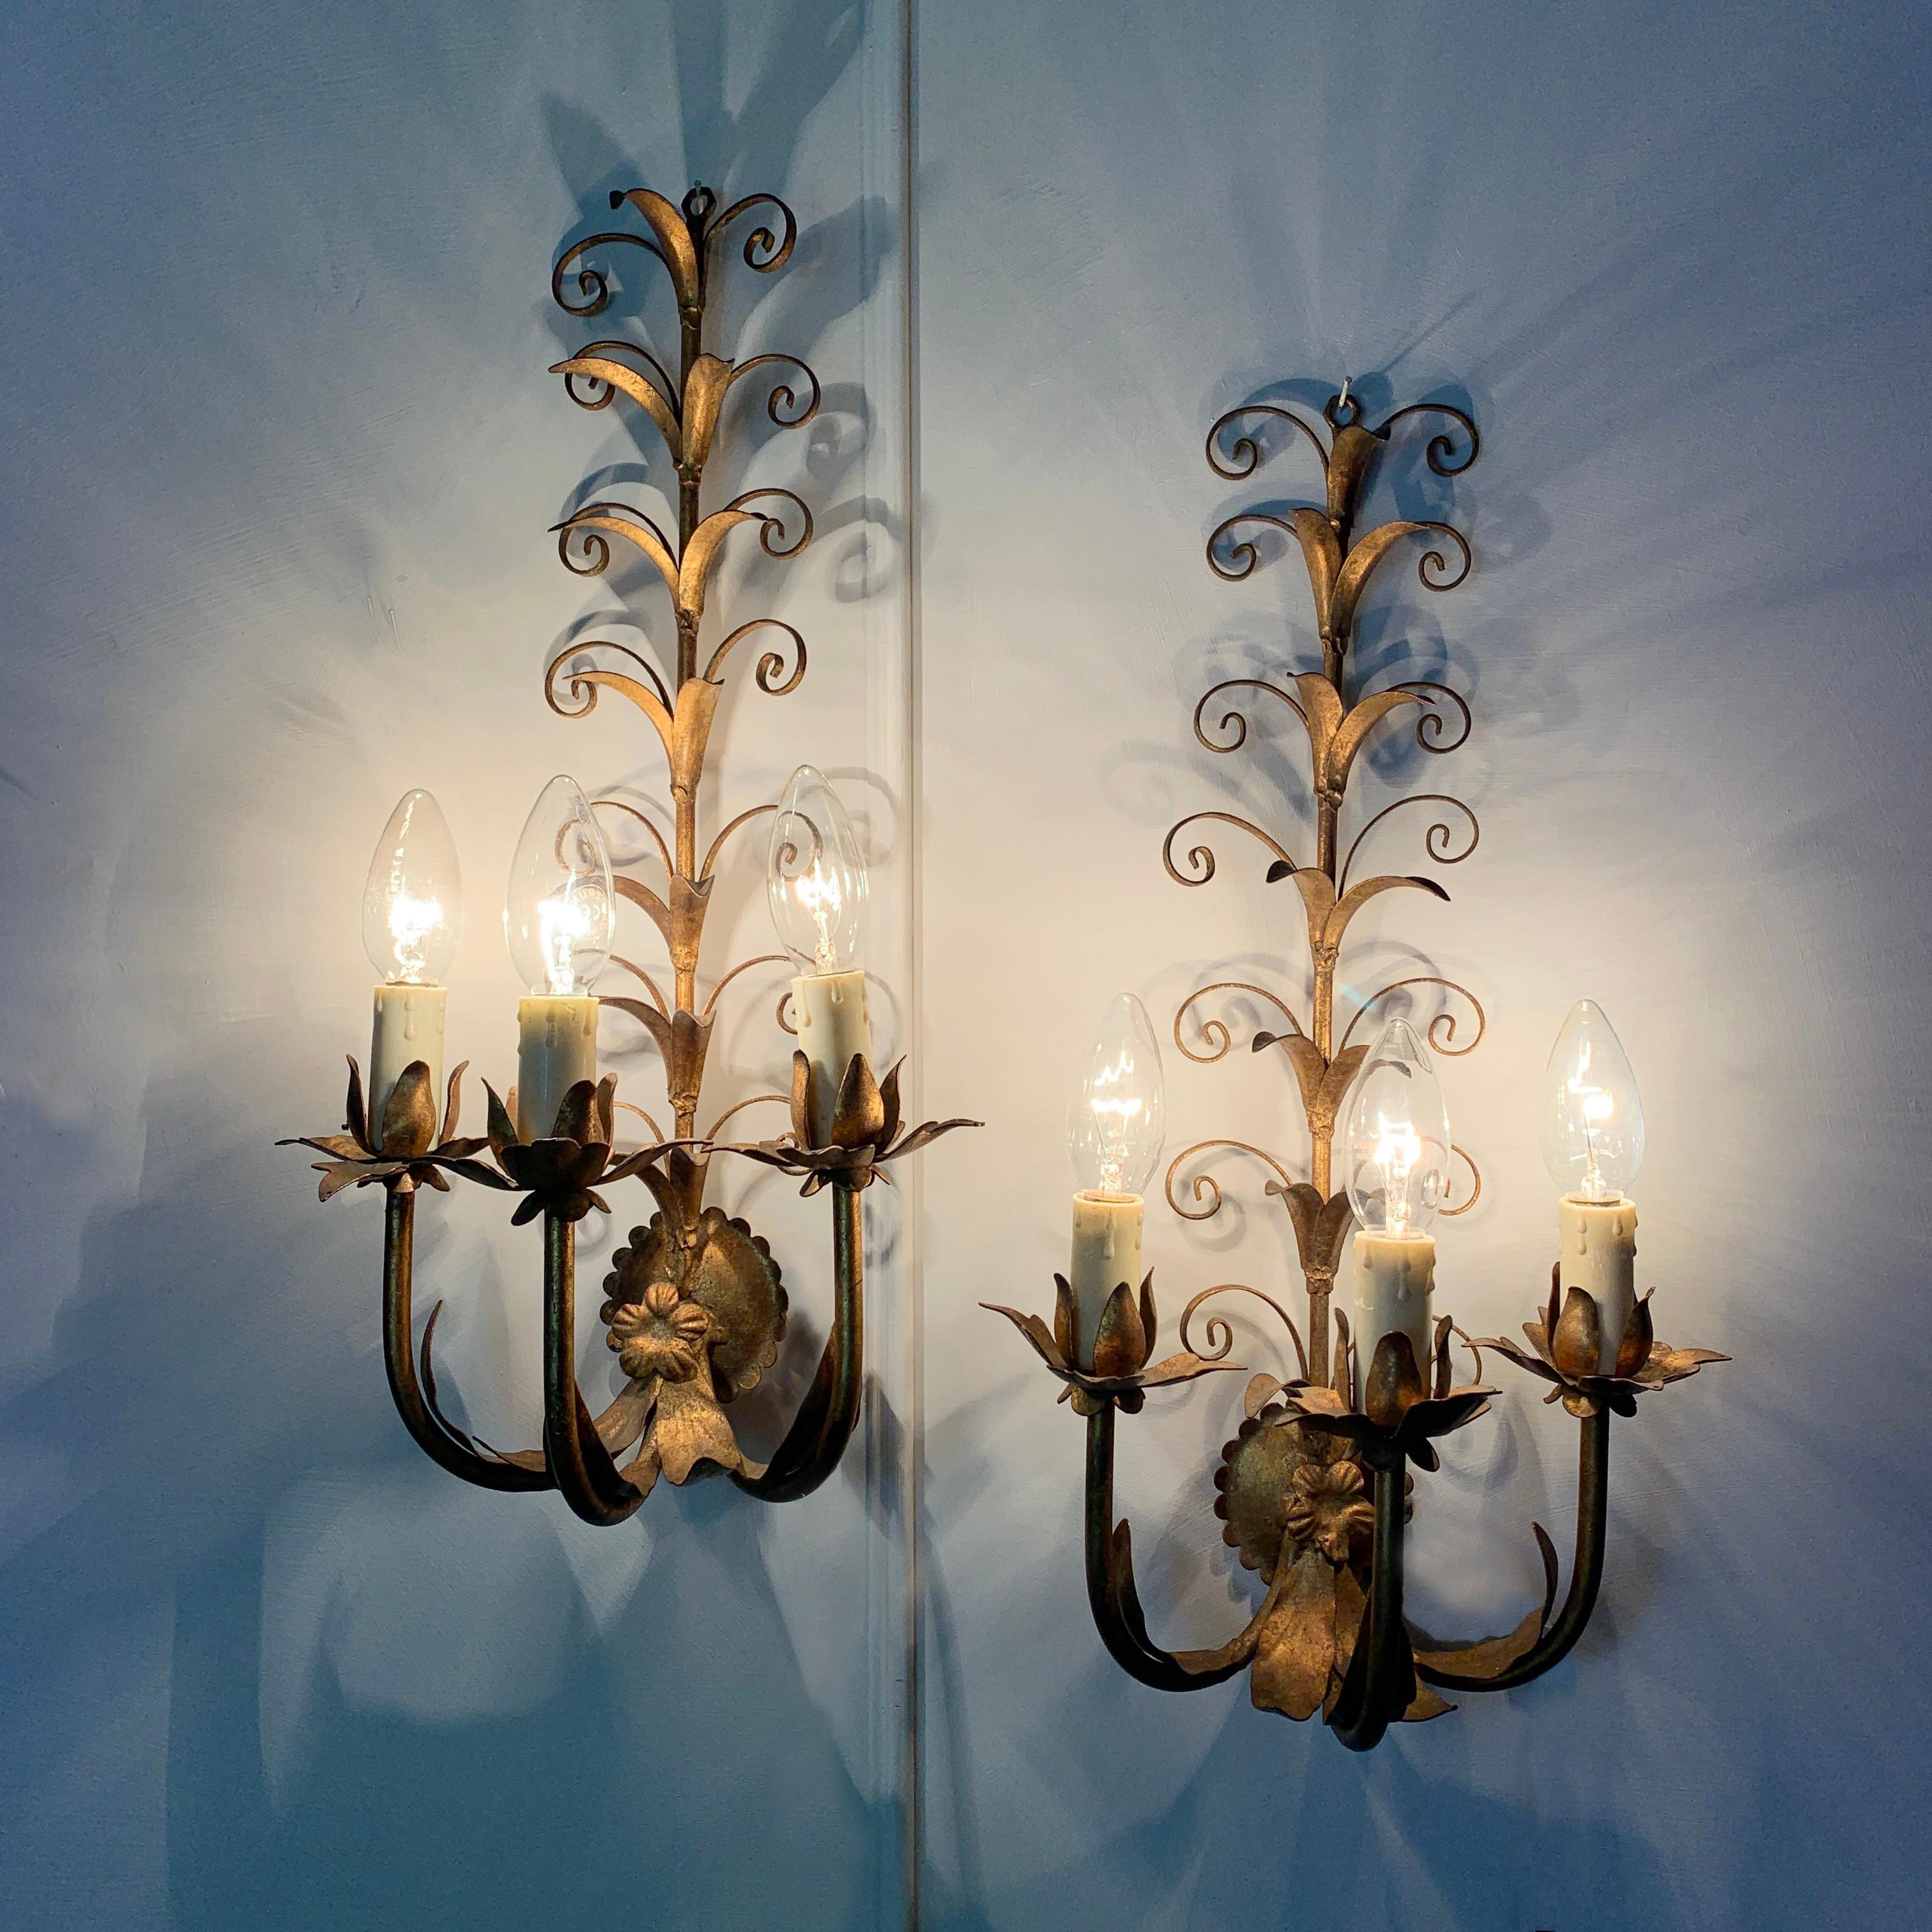 Pair of French curled leaf wall sconce's, circa 1960s
Original gilt finish
3 lamp holders per light, each taking E14 small screw in bulbs
Measures: 49cm height, 26cm width, 17cm depth
Hanging hook at top
Price is for the pair, 2 wall